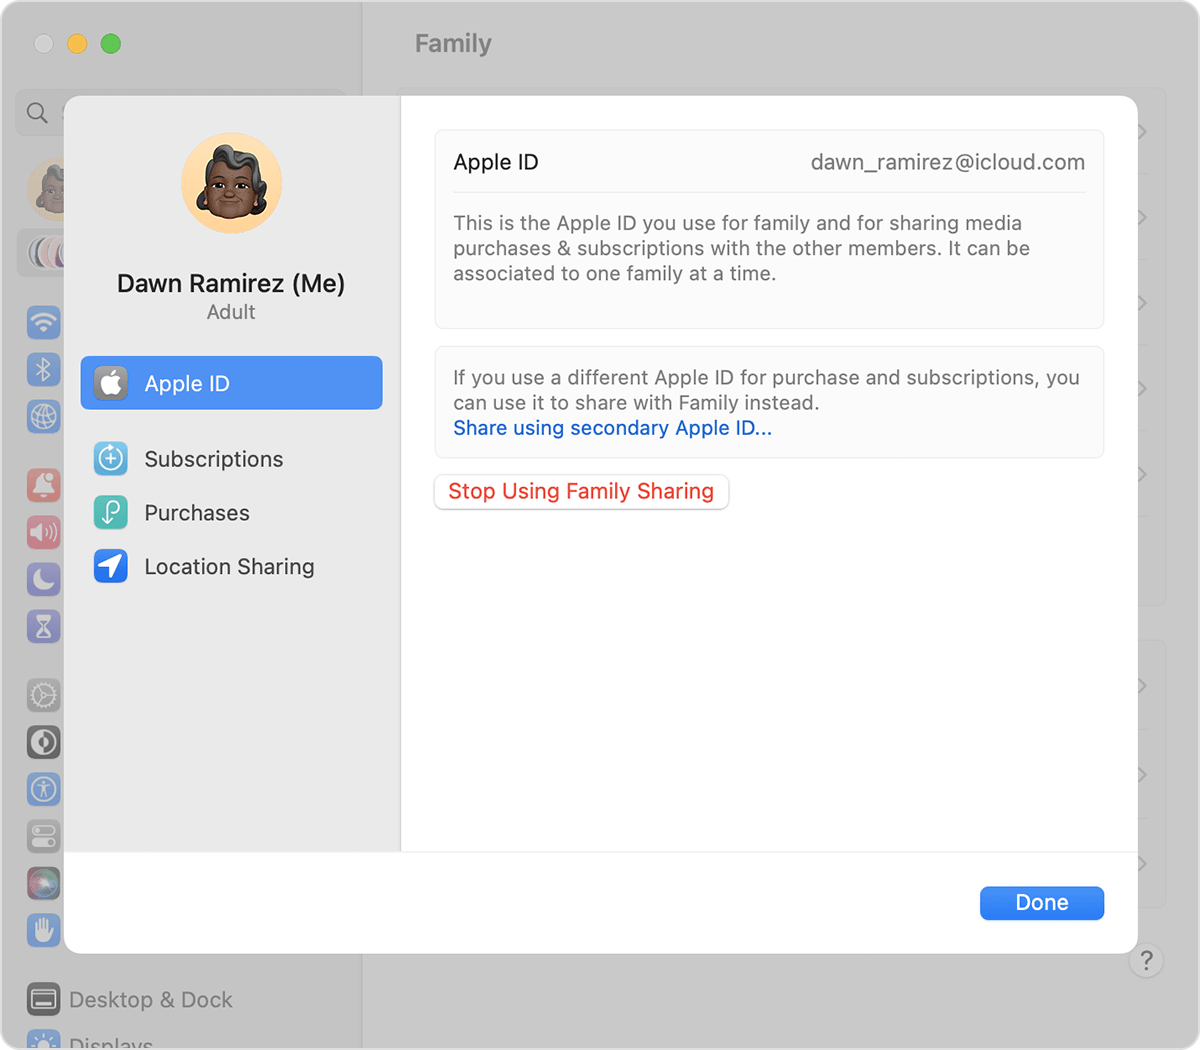 Stop Using Family Sharing is located below 'Share using secondary Apple ID.'